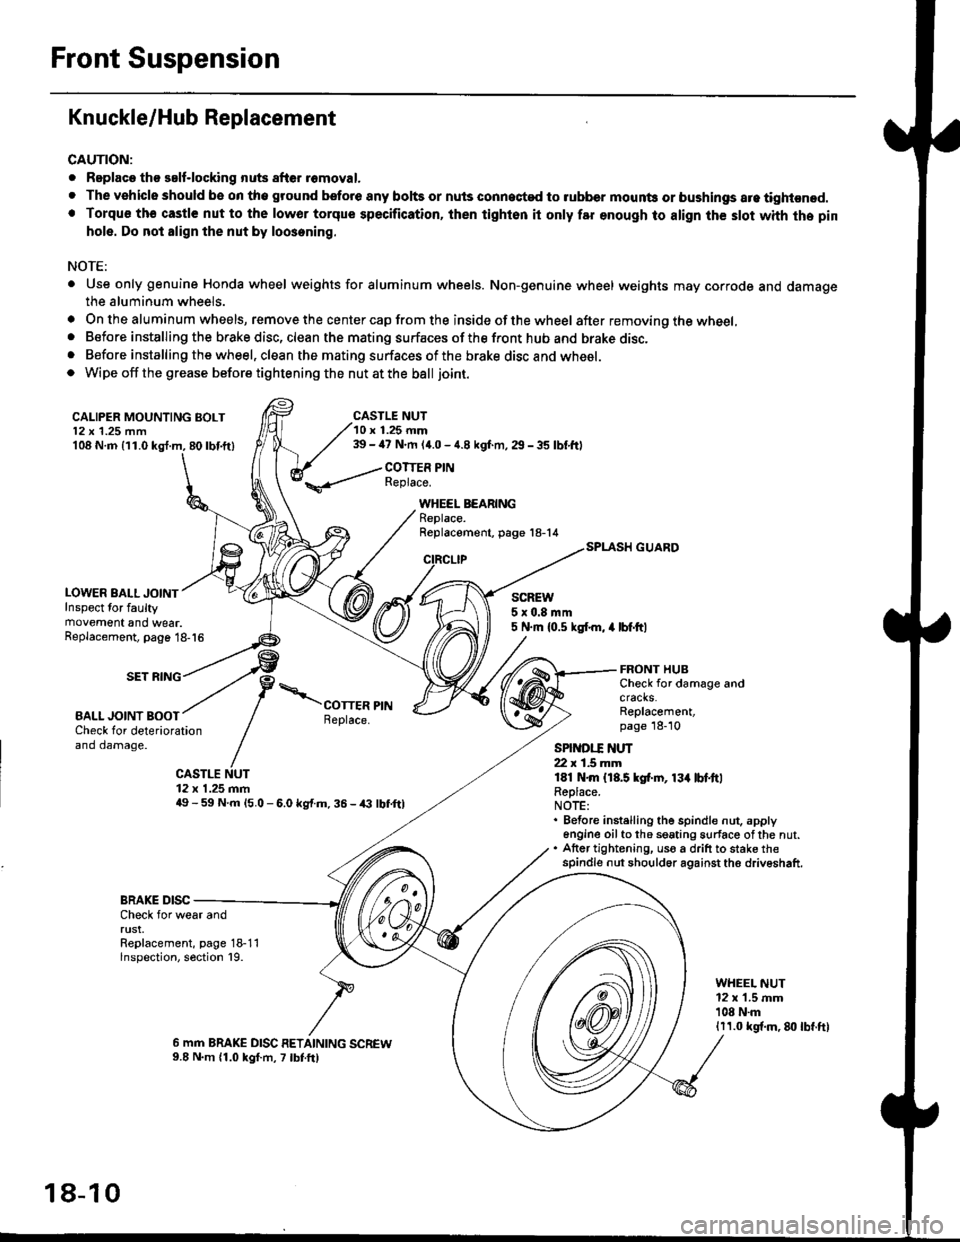 HONDA CIVIC 1999 6.G Workshop Manual Front Suspension
Knuckle/Hub Replacement
CAUTION:
. Replaco tho salf-locking nuts after romoval.
. The vehiclo should be on tho ground bsfore any bohs or nuls connected to rubber mounb or bushings are